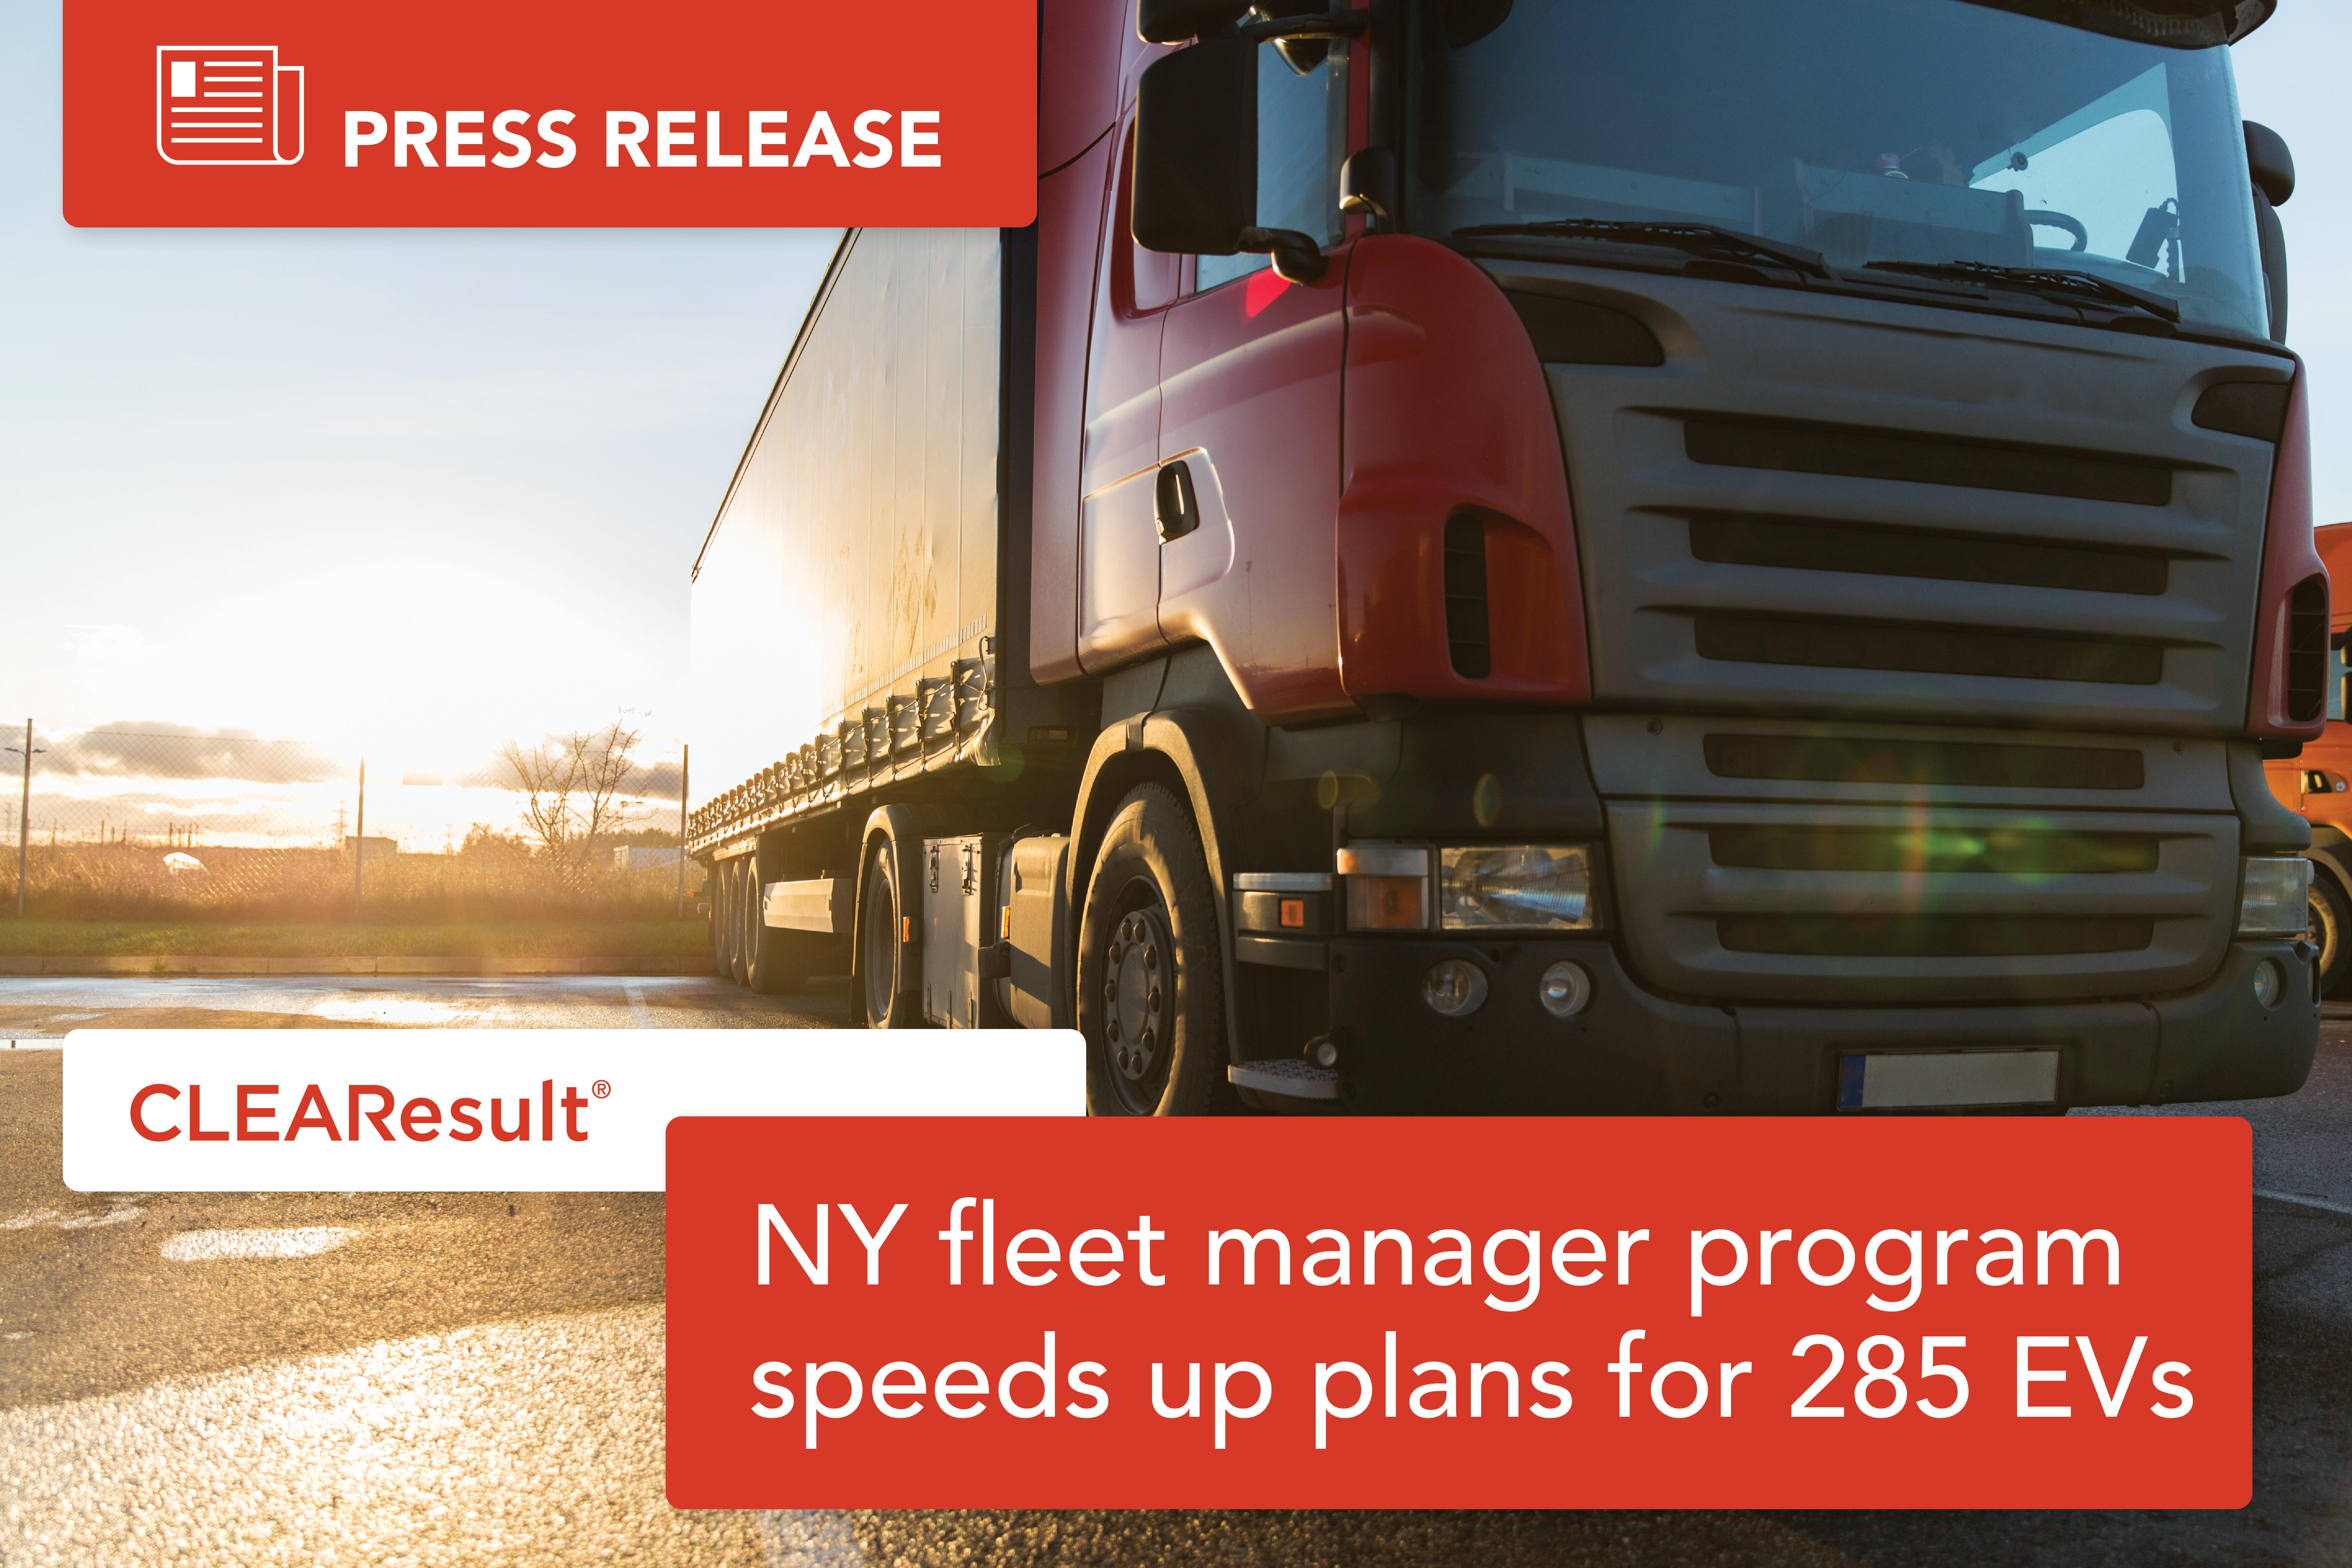 New York fleet manager electrification program results in plans for 285 electric vehicles